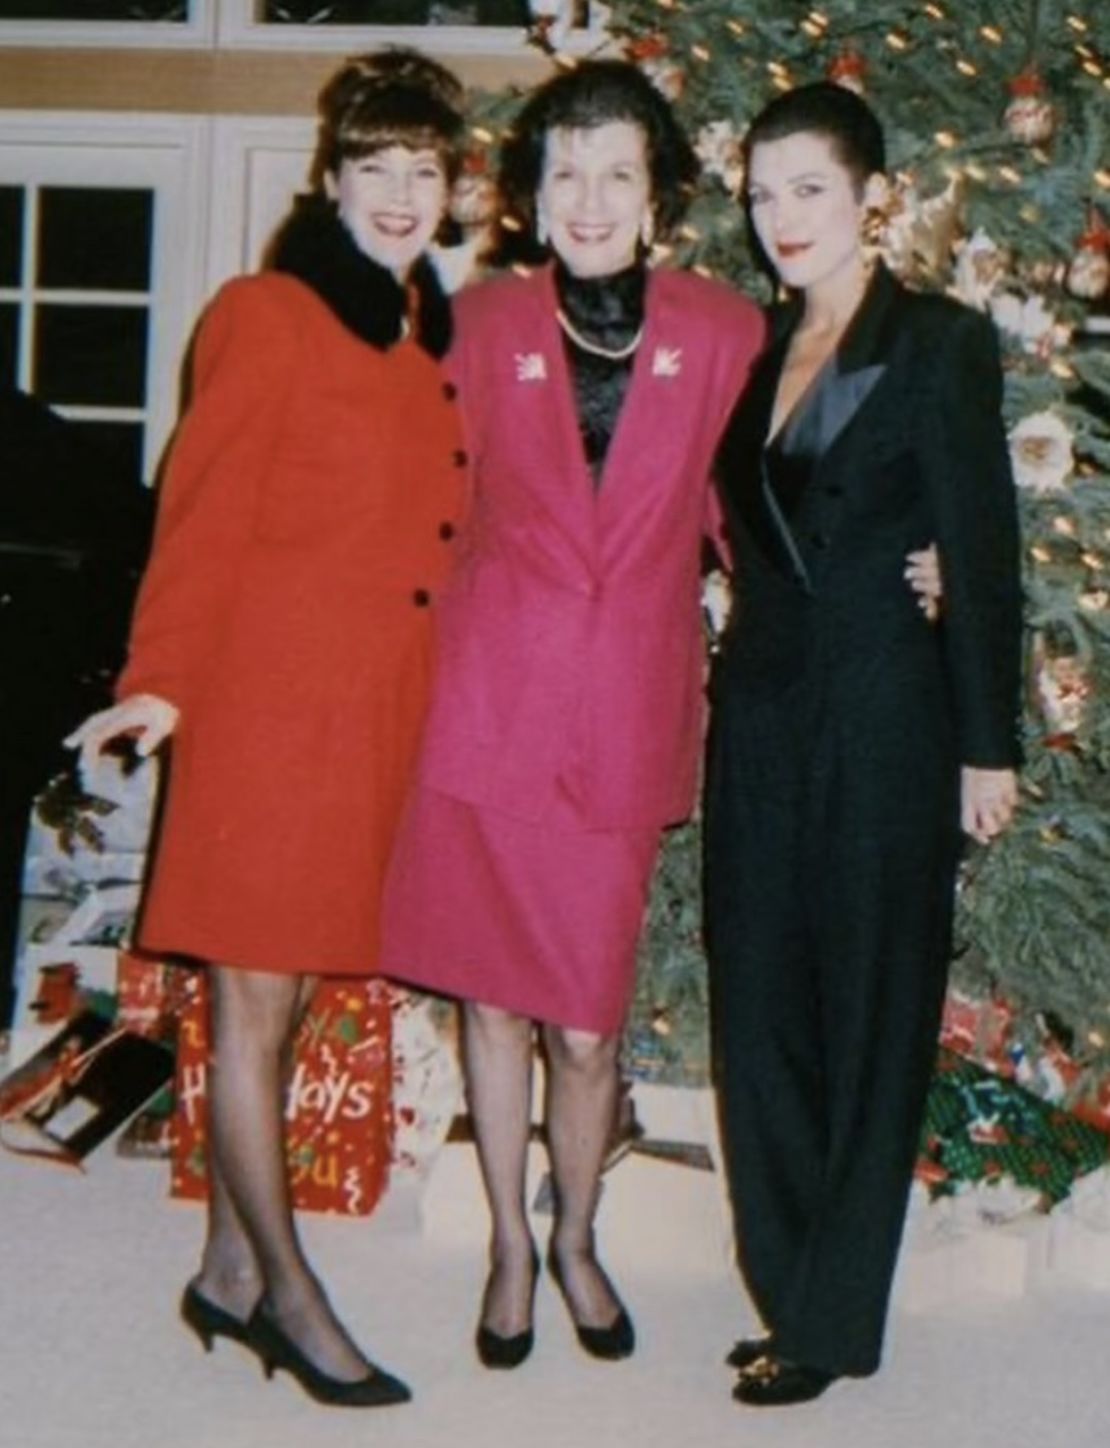 Karen Houghton (left) and Kris Jenner (right) with their mom, Mary Jo Campbell.